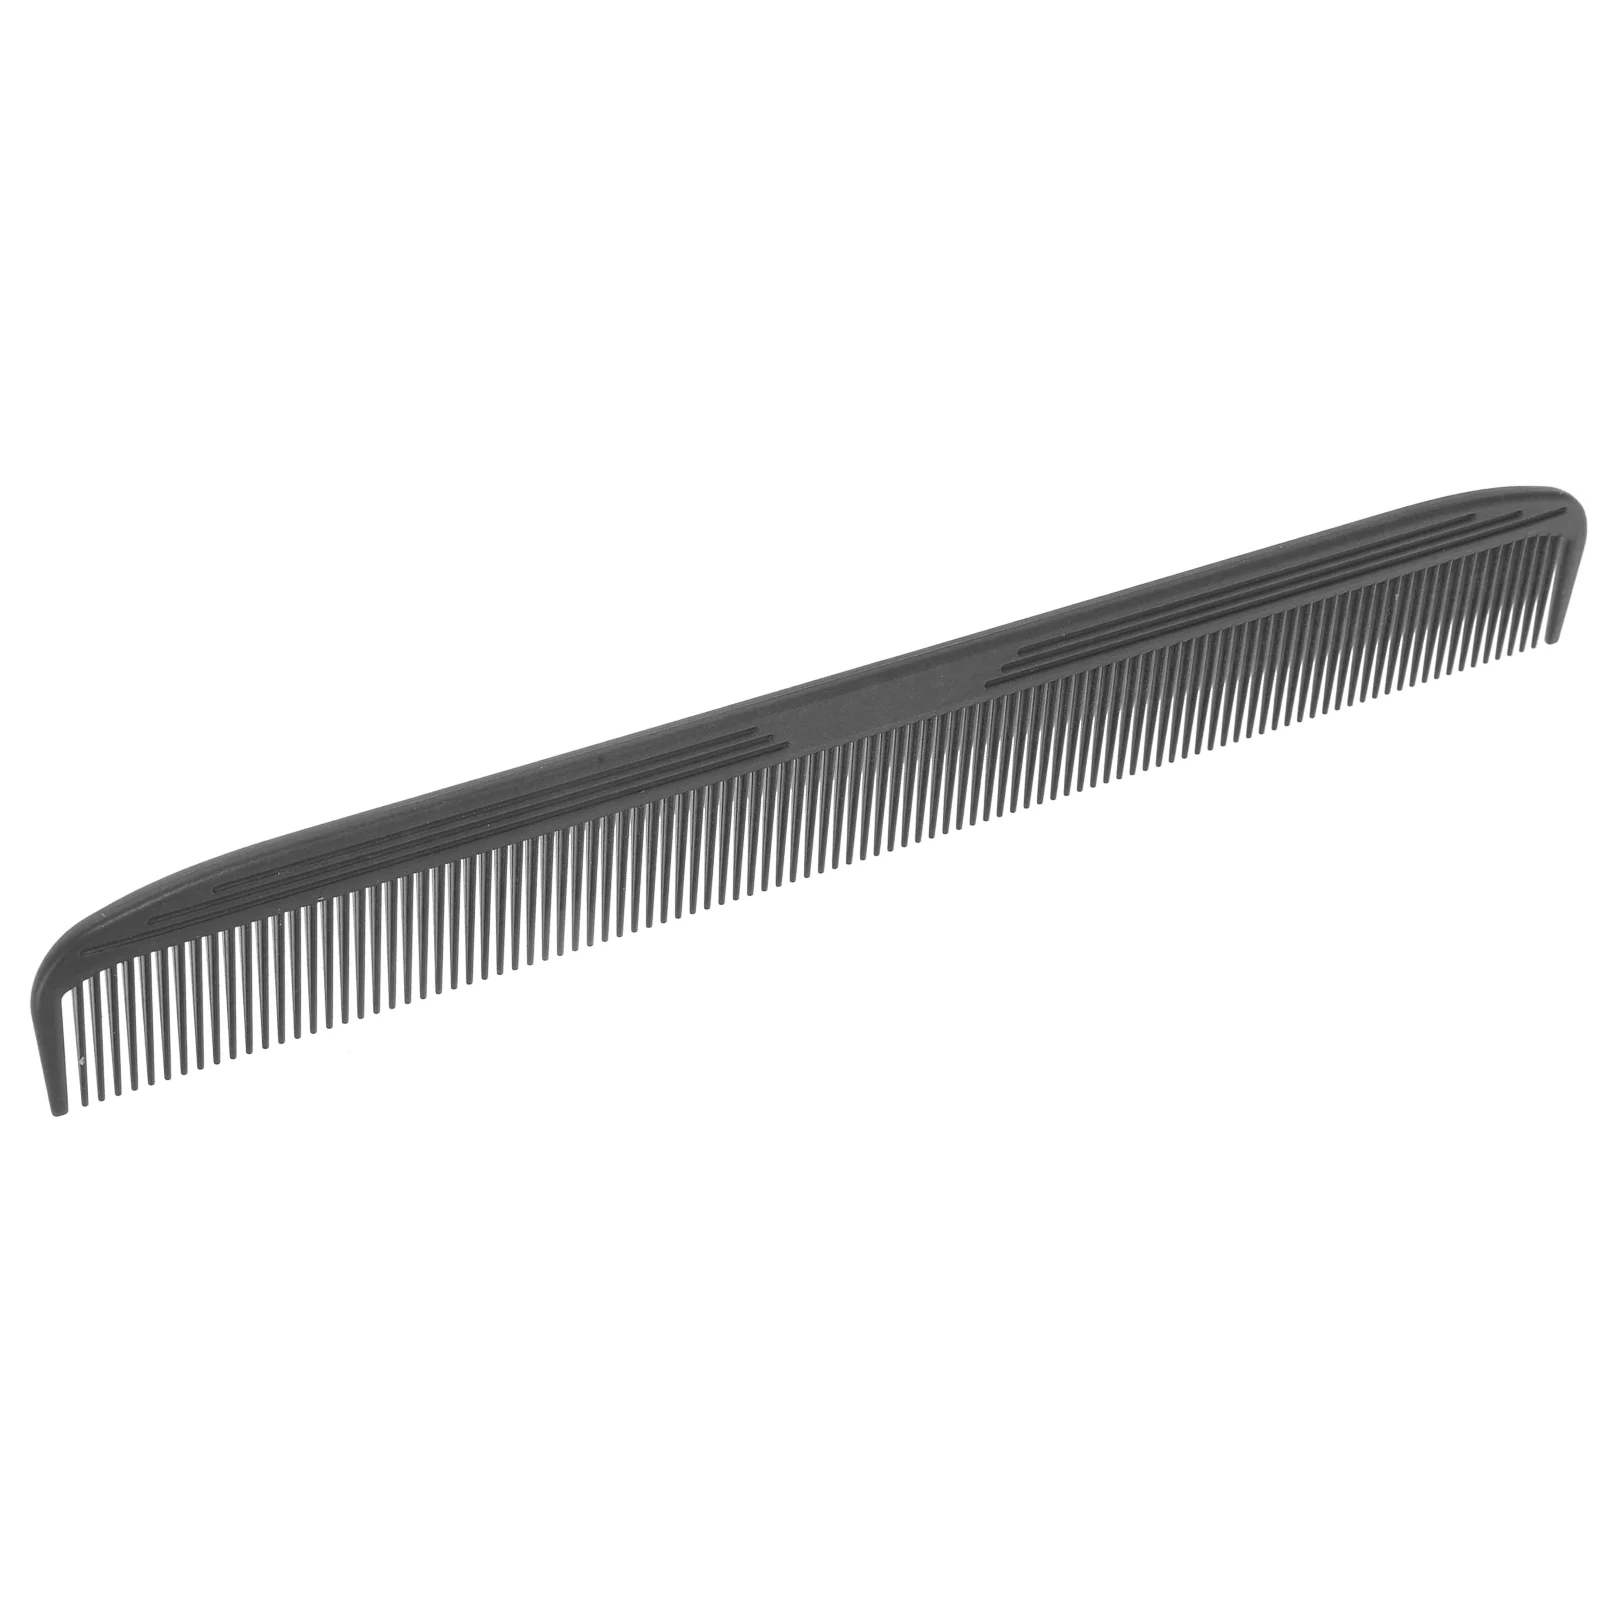 

Hair Comb Braiding Parting Combs Cutting Double Sided Precision Abs Professional Barber Man